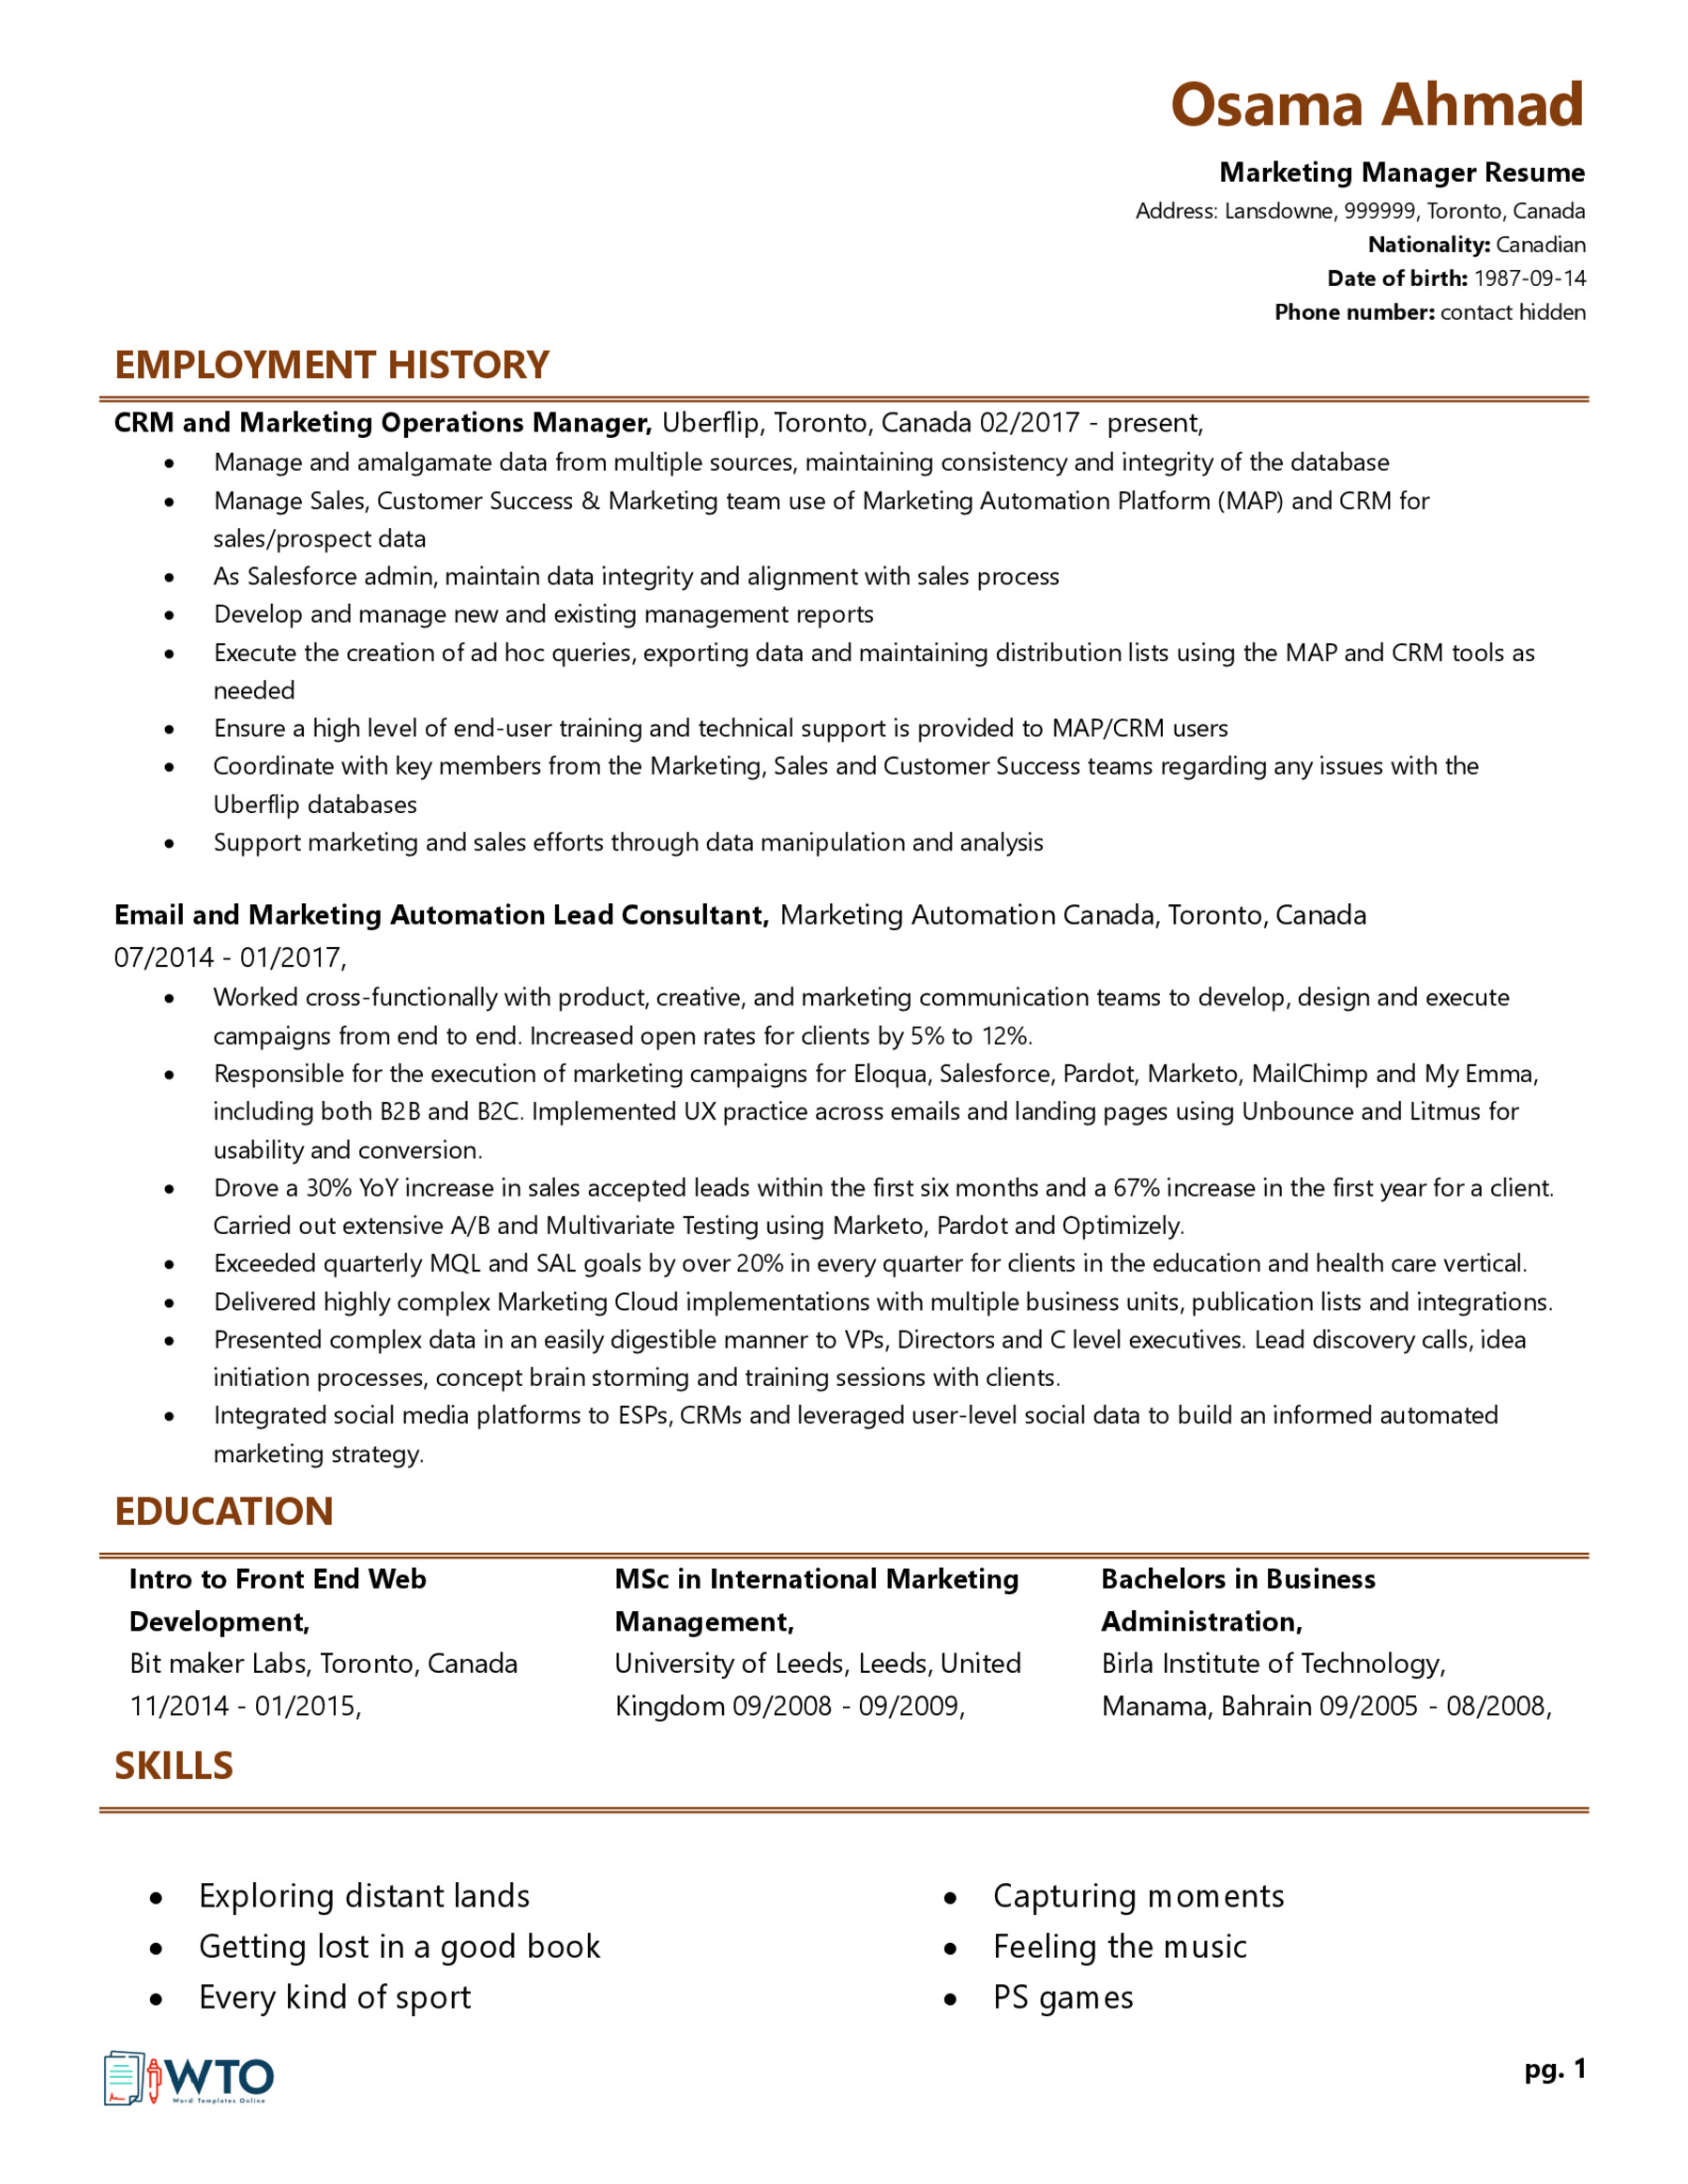 Marketing Manager Resume Template - Customizable Format